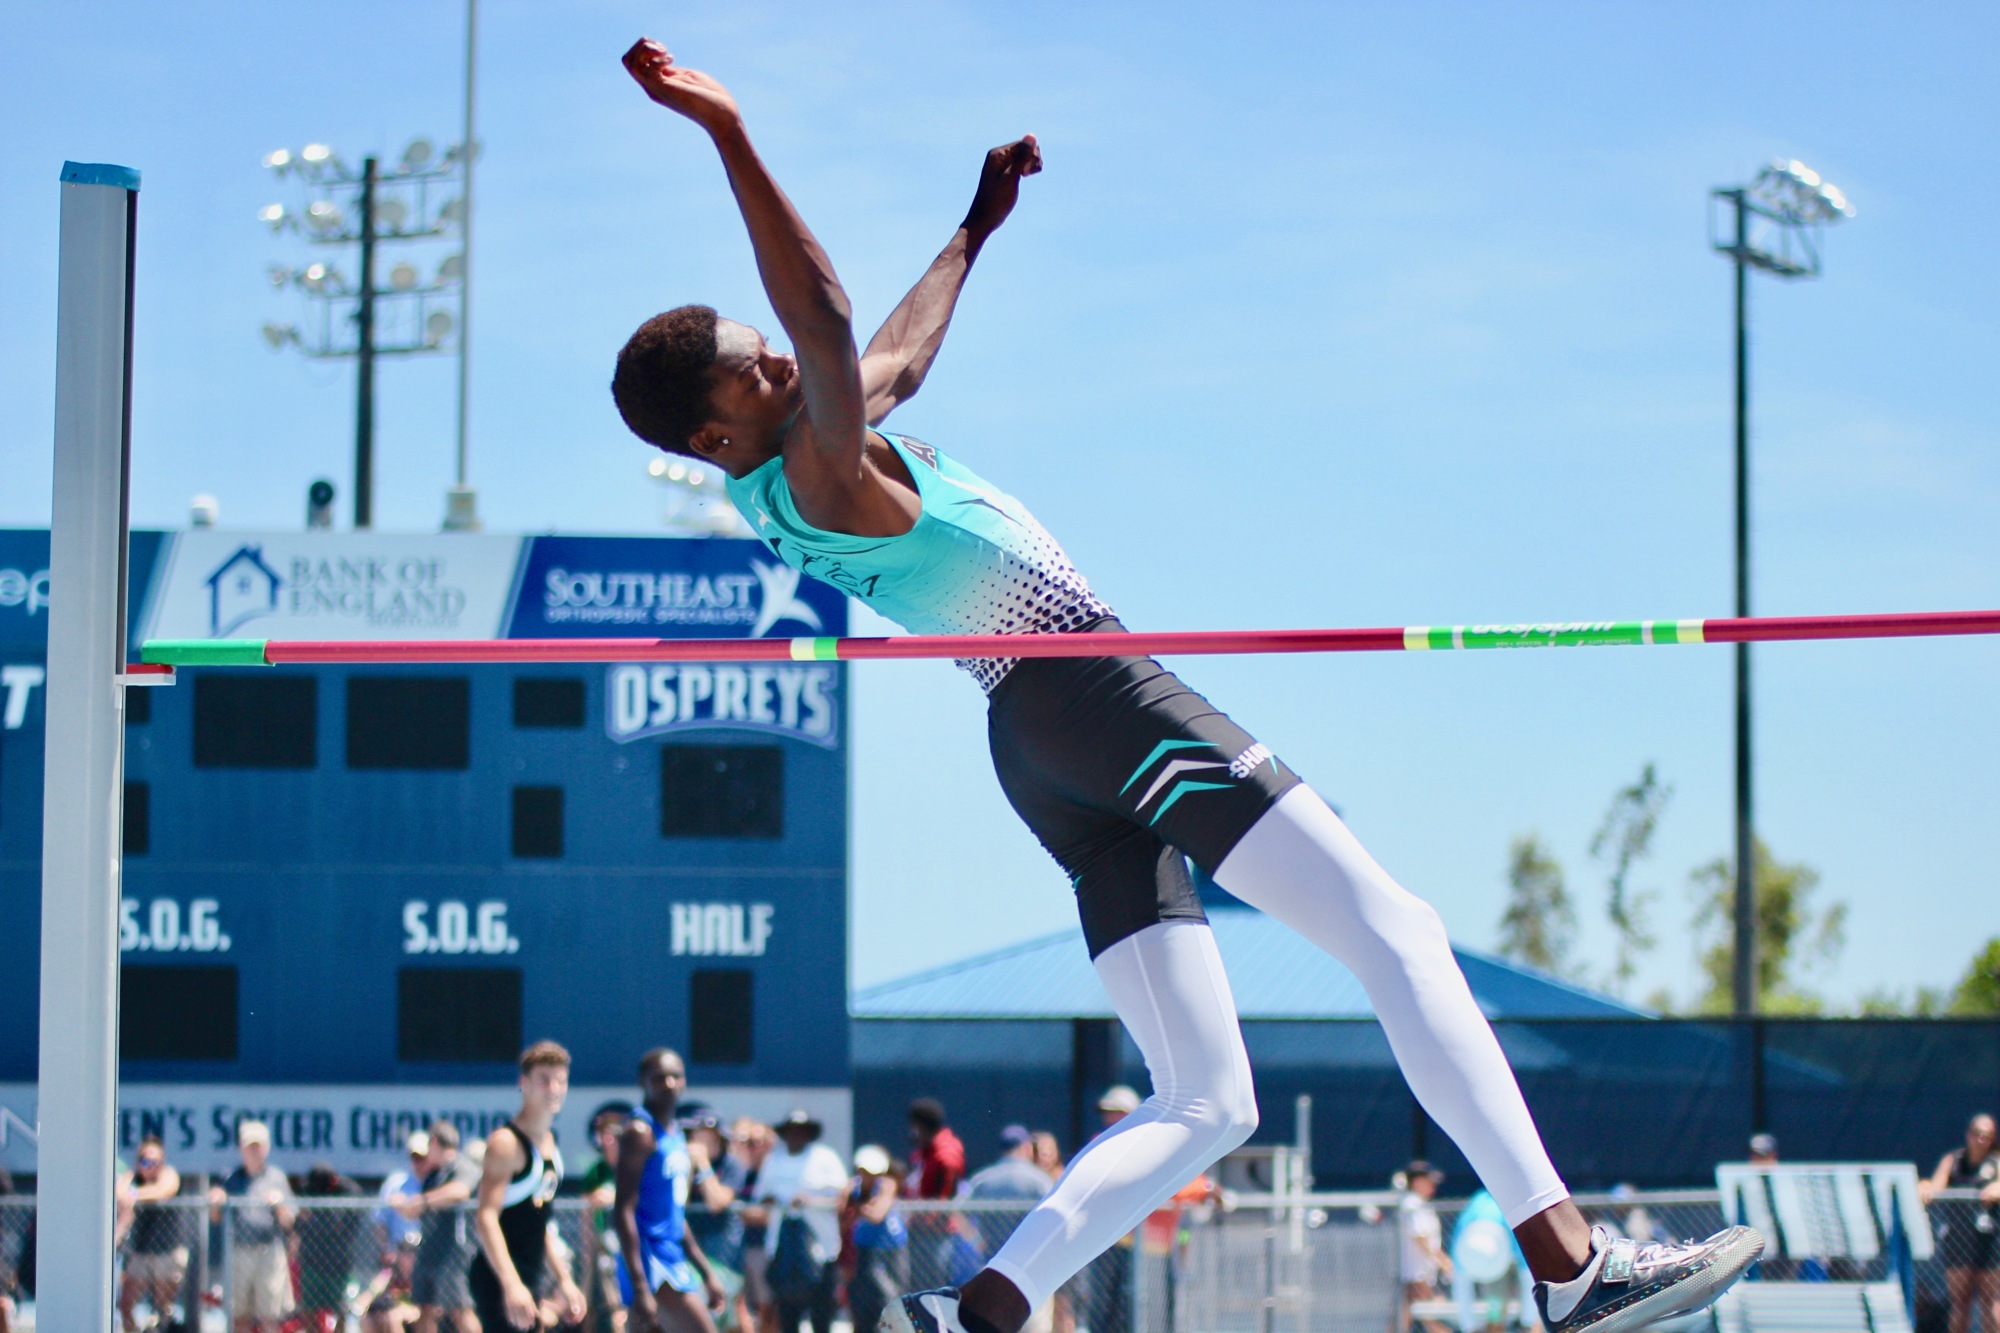 Atlantic's David Long competes in the boys 2A high jump. Photo by Ray Boone